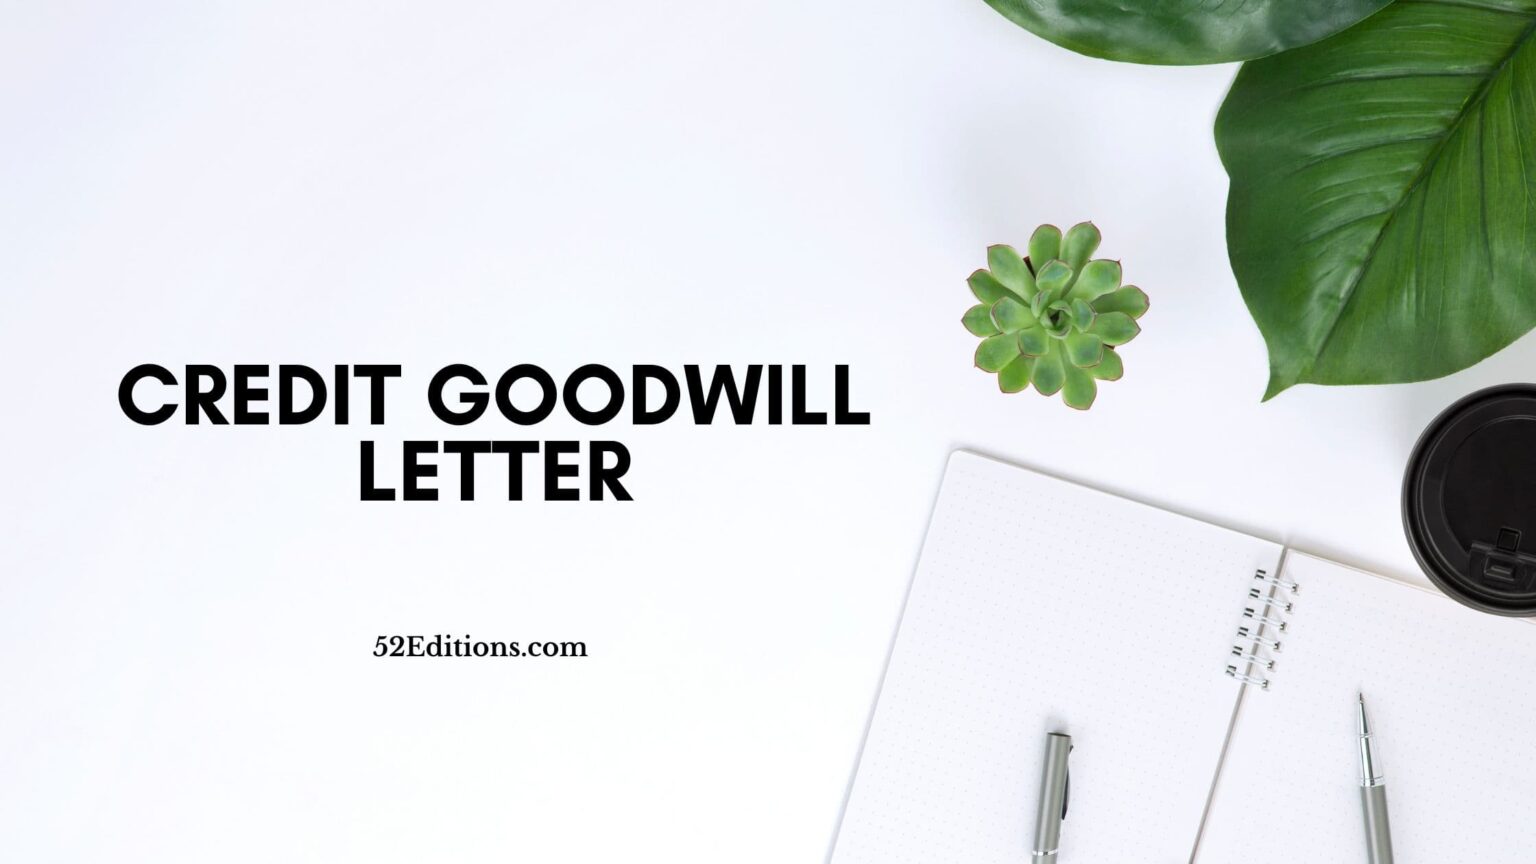 Credit Goodwill Letter // Get FREE Letter Templates (Print or Download)